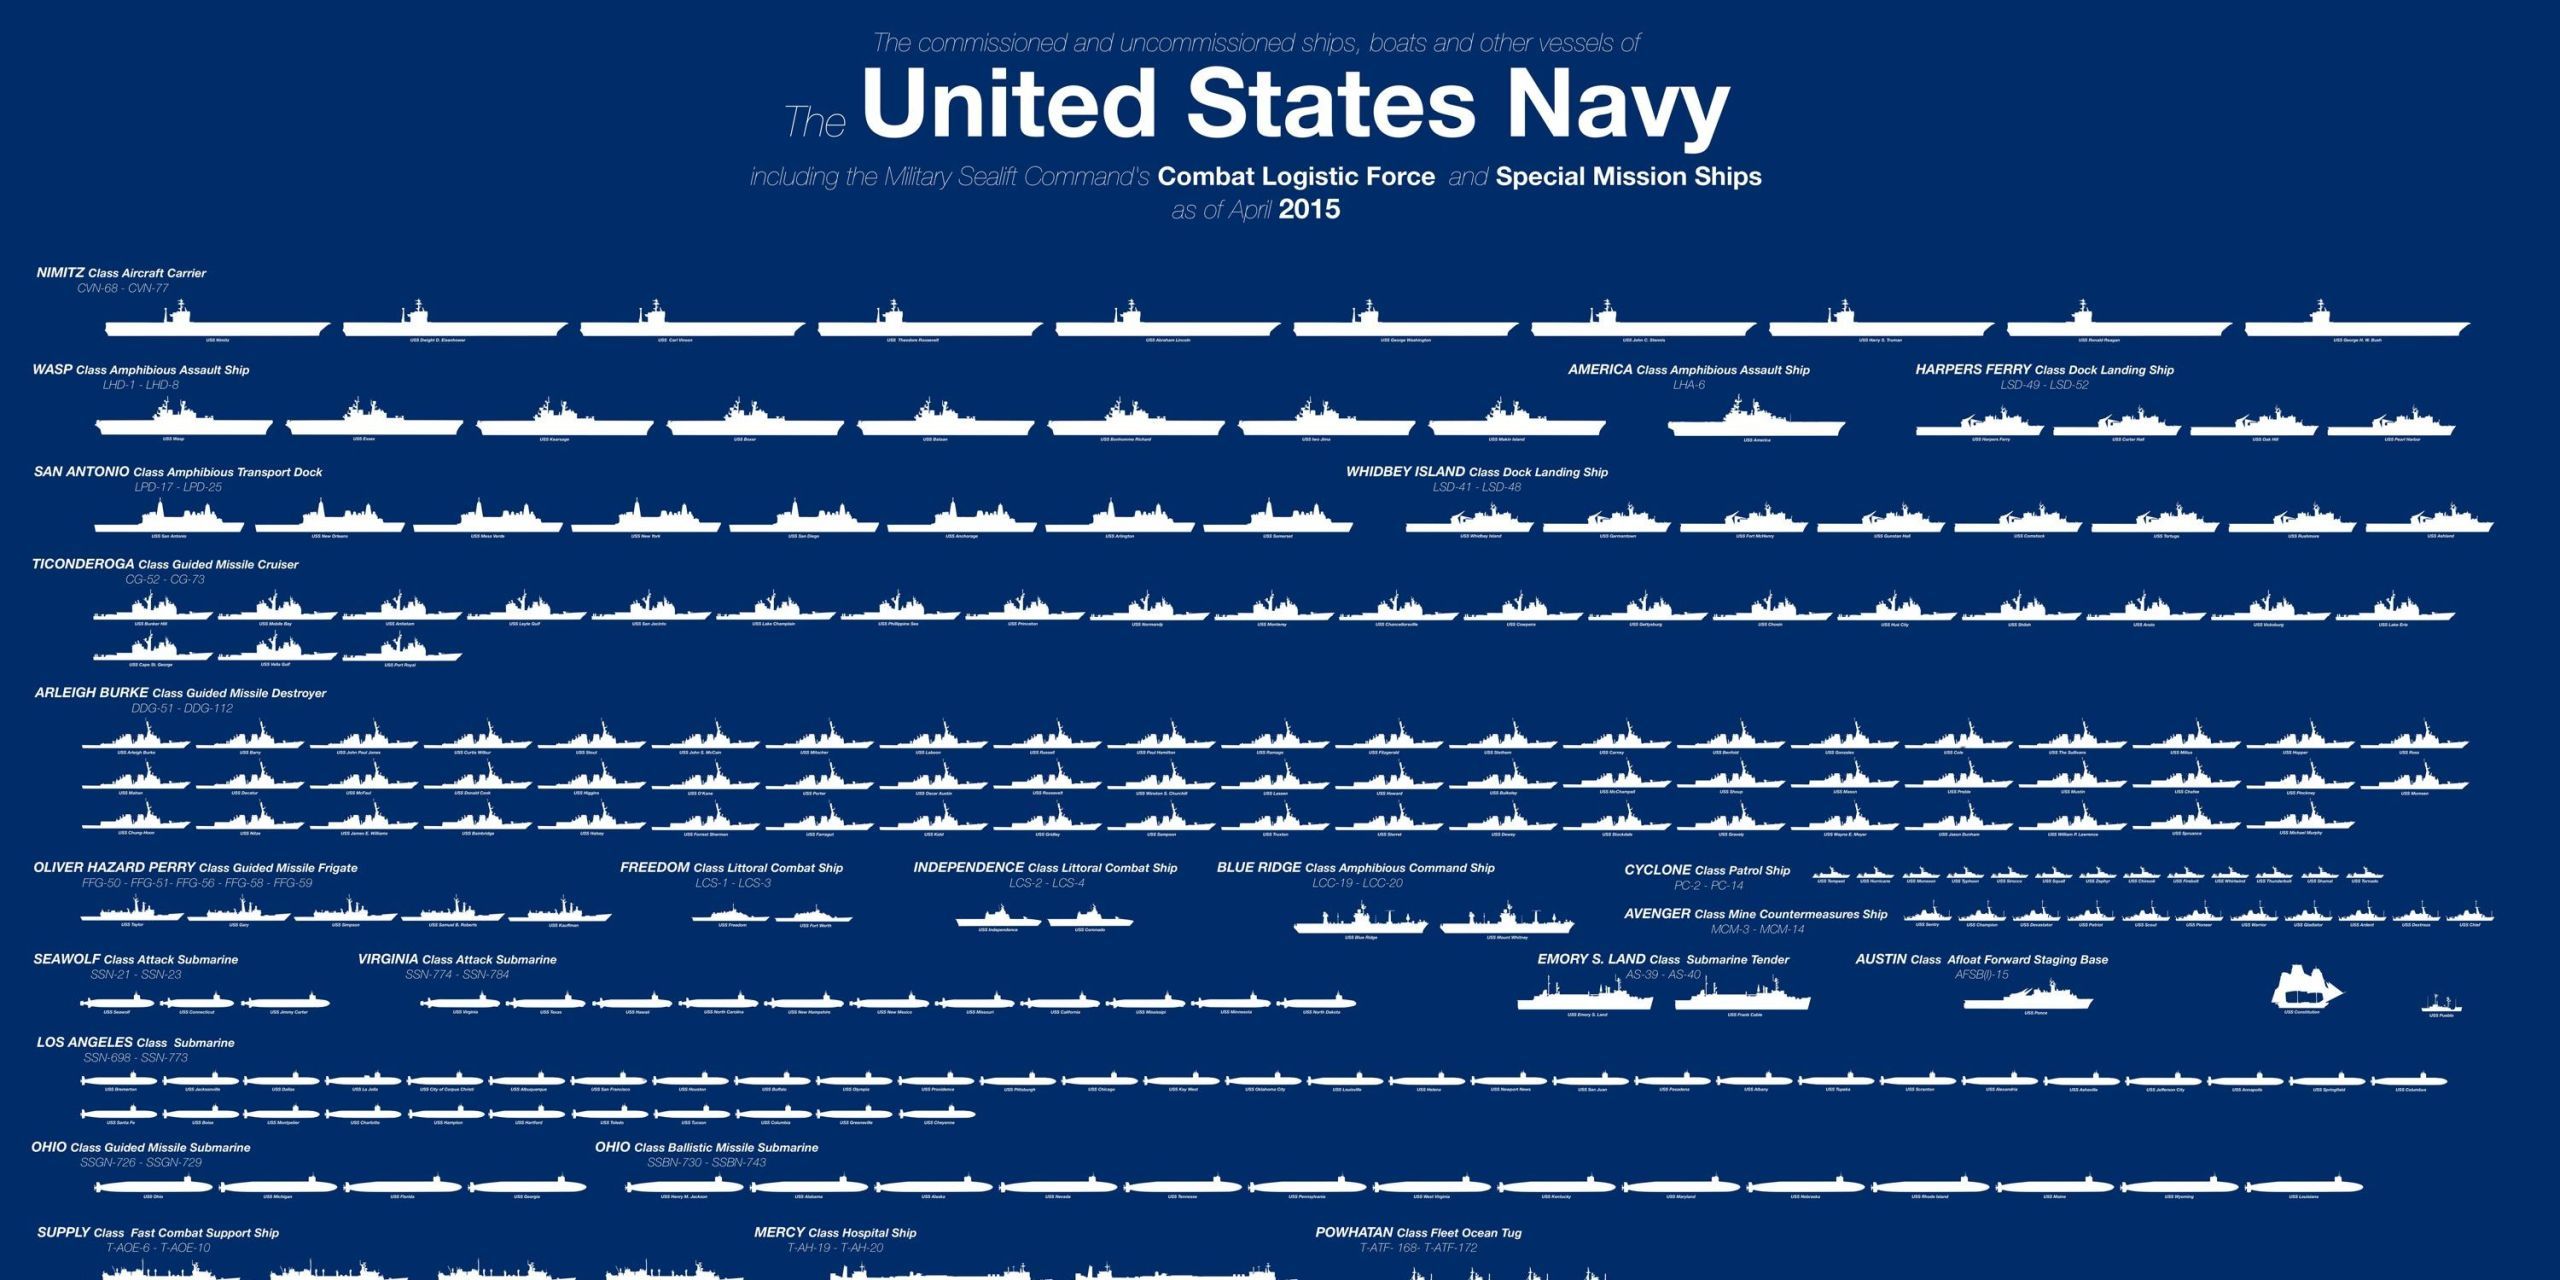 was the union navy larger than the royal navy during civil war